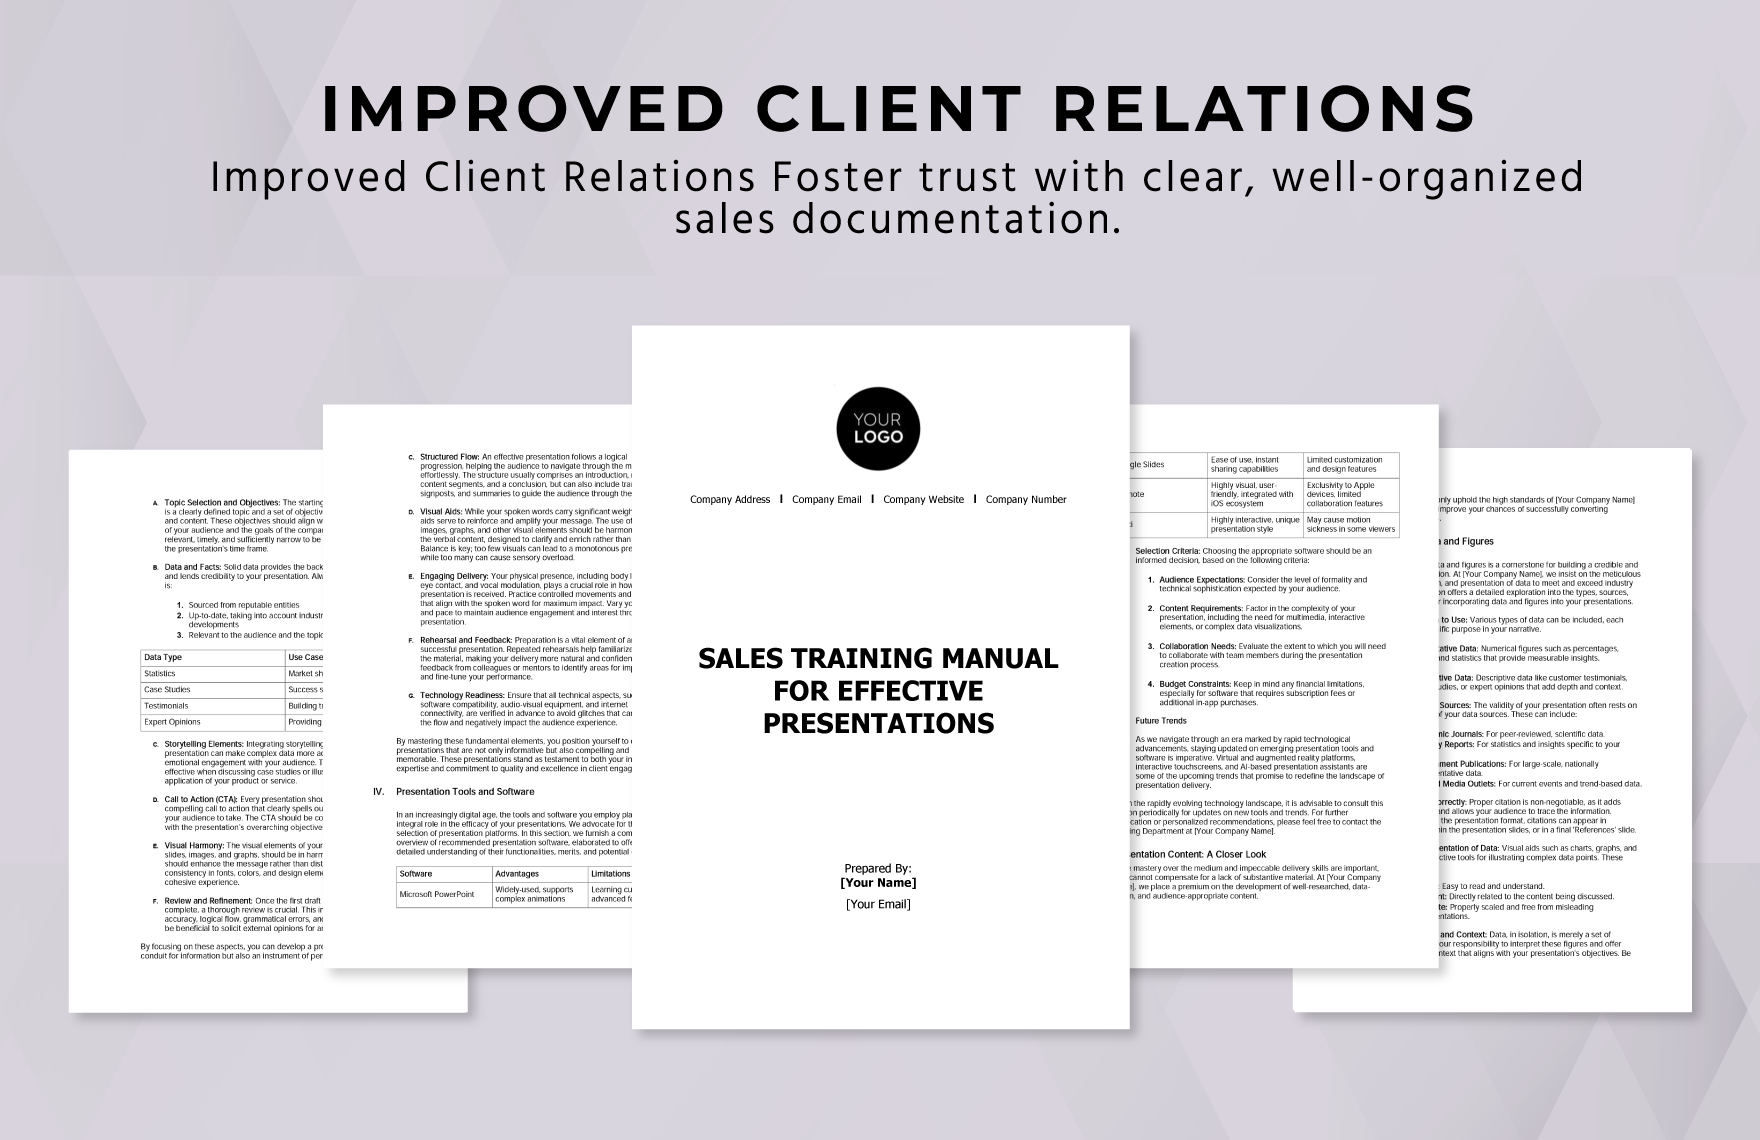 Sales Training Manual for Effective Presentations Template